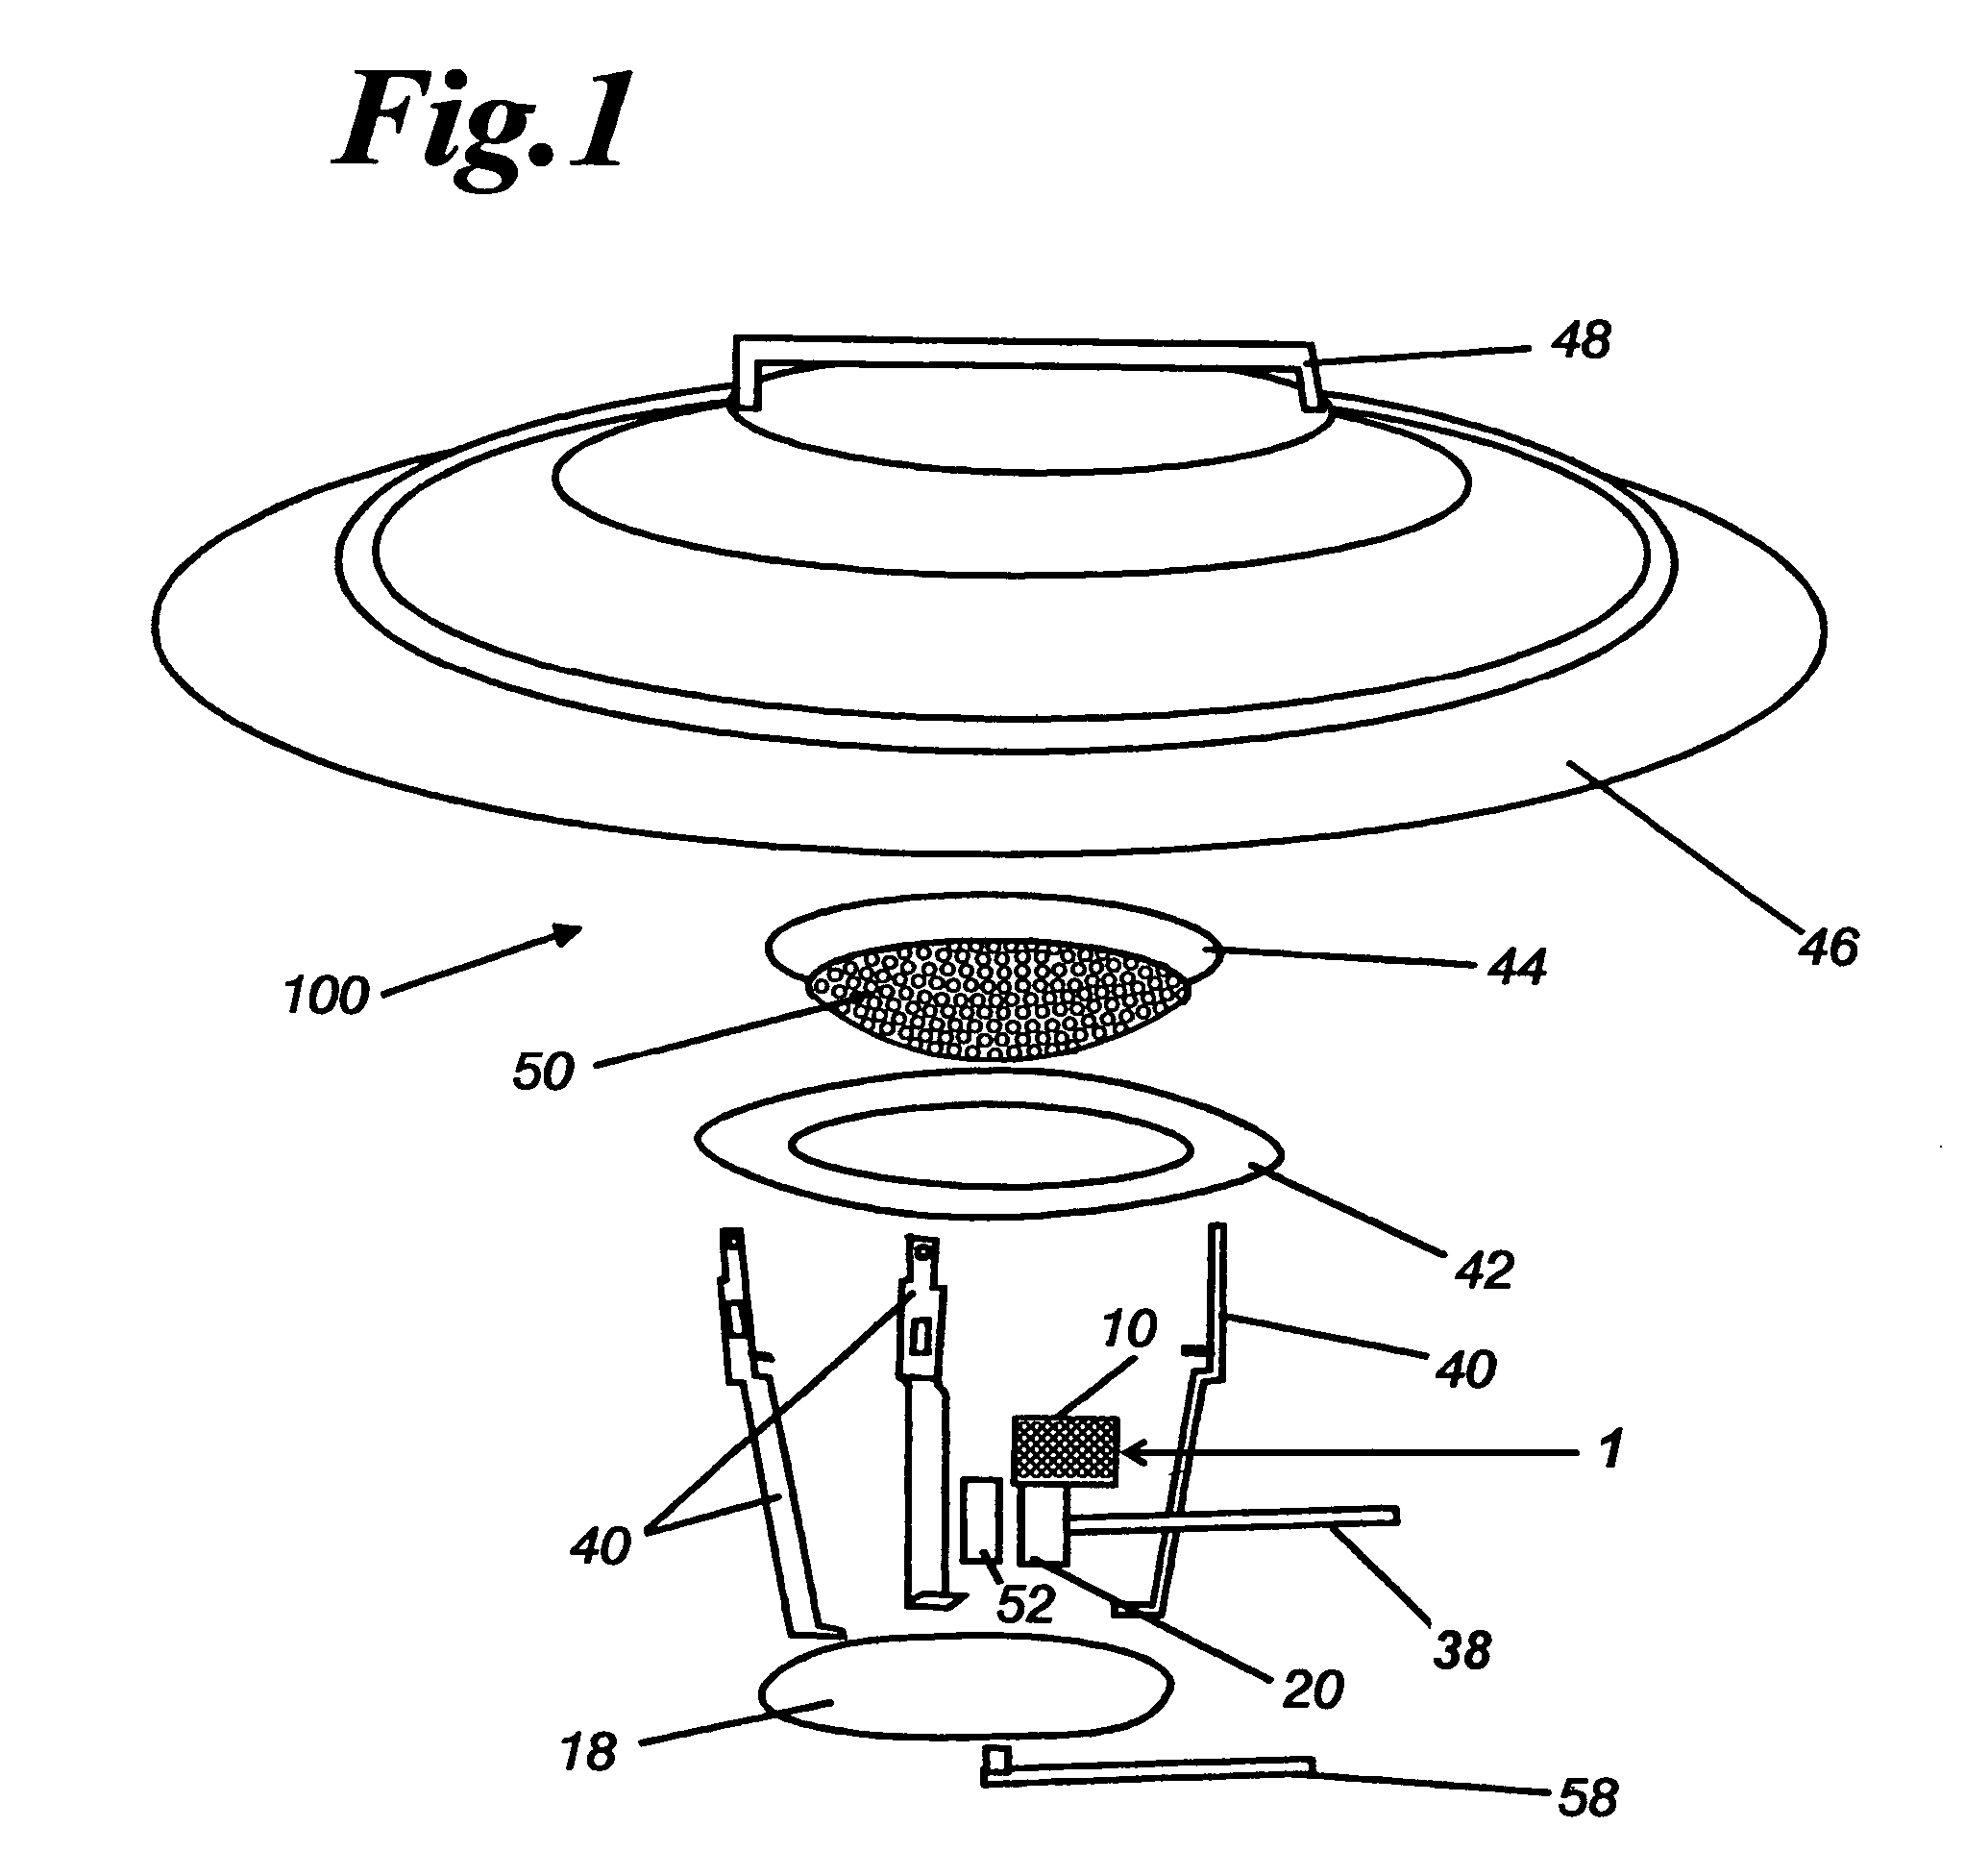 Apparatus having improved wind resistance that is a synergistic combination of a windshield and a brooder heater pilot assembly